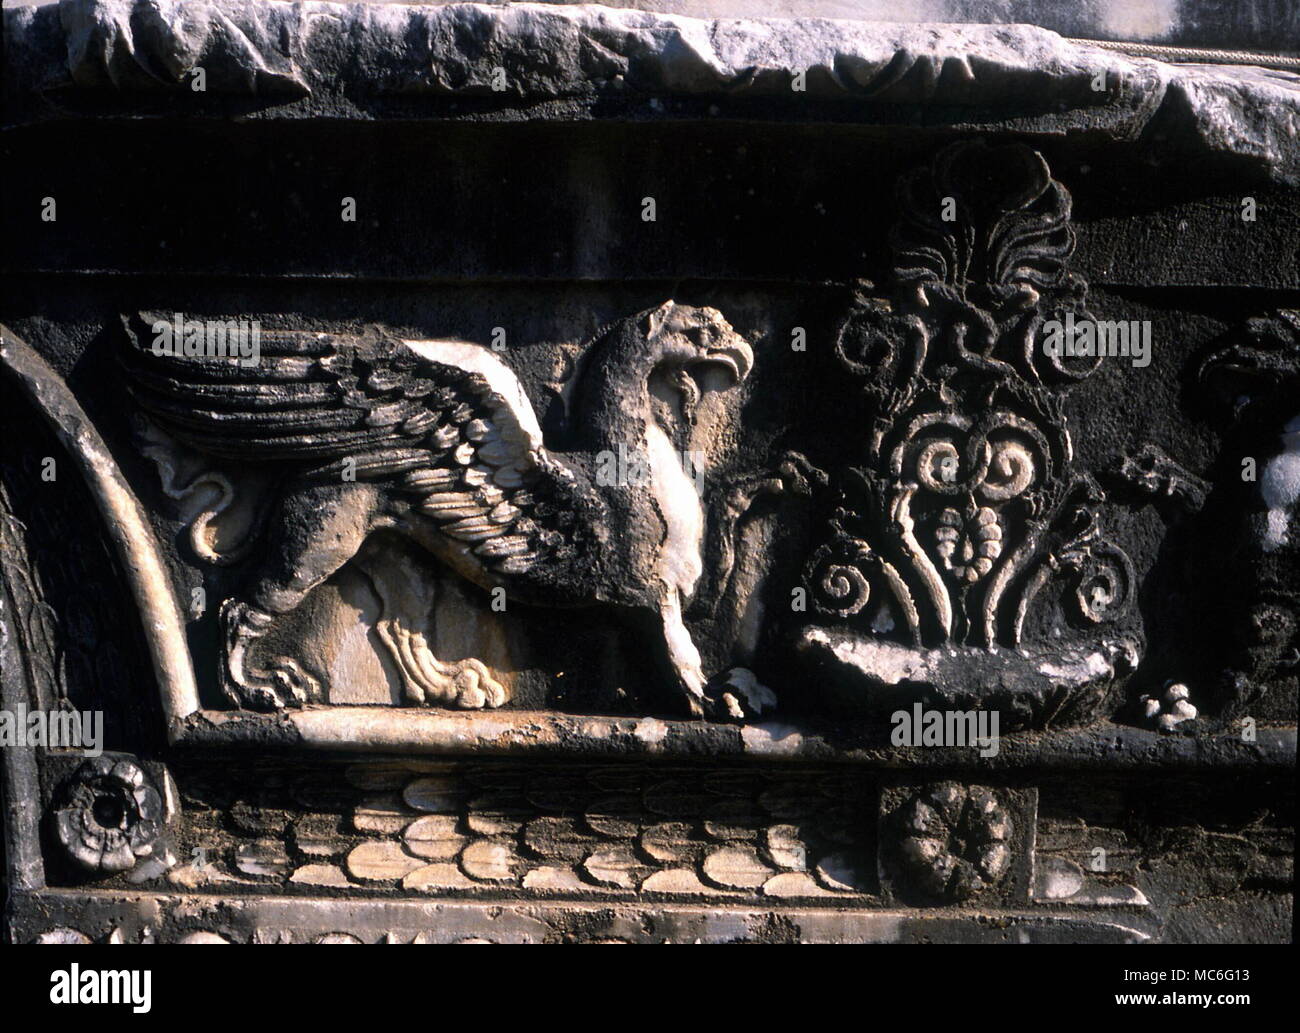 Griffin, a fabulous beast with the head and wings of an eagle, and the body of lion. Bas relief inside the Greek temple at Didyma, Turkey. Stock Photo